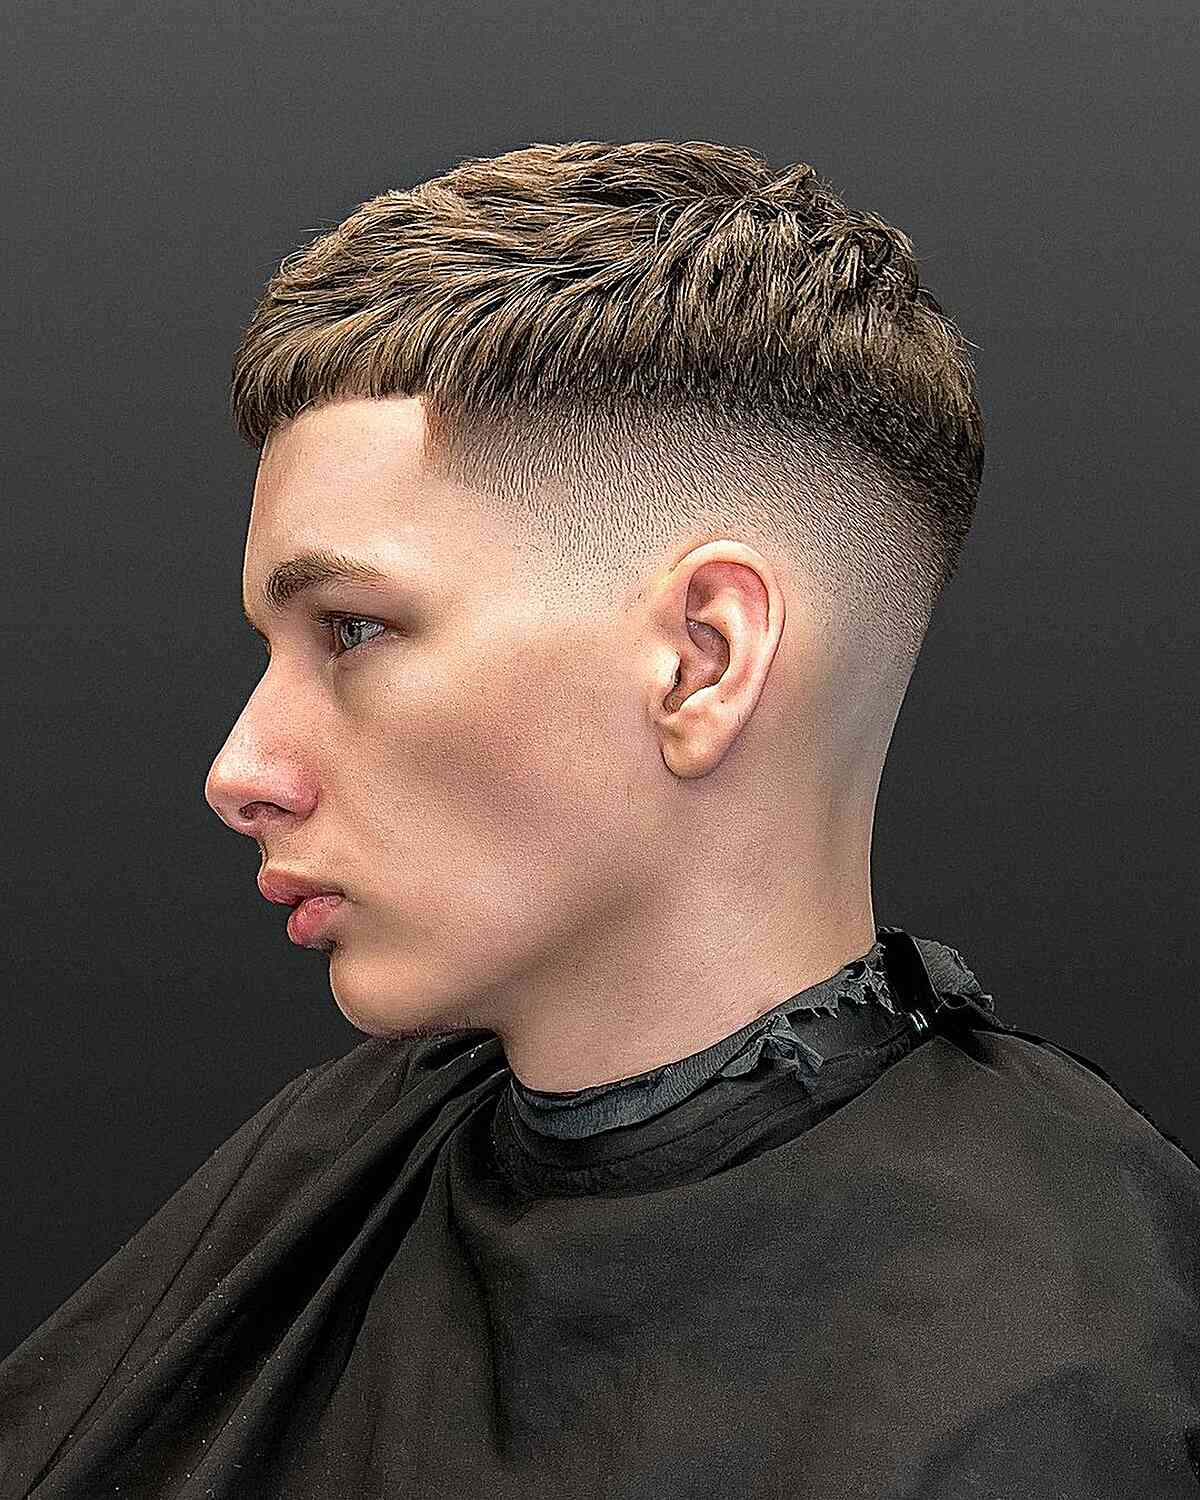 Picture showing a guy rocking the look with textured bangs